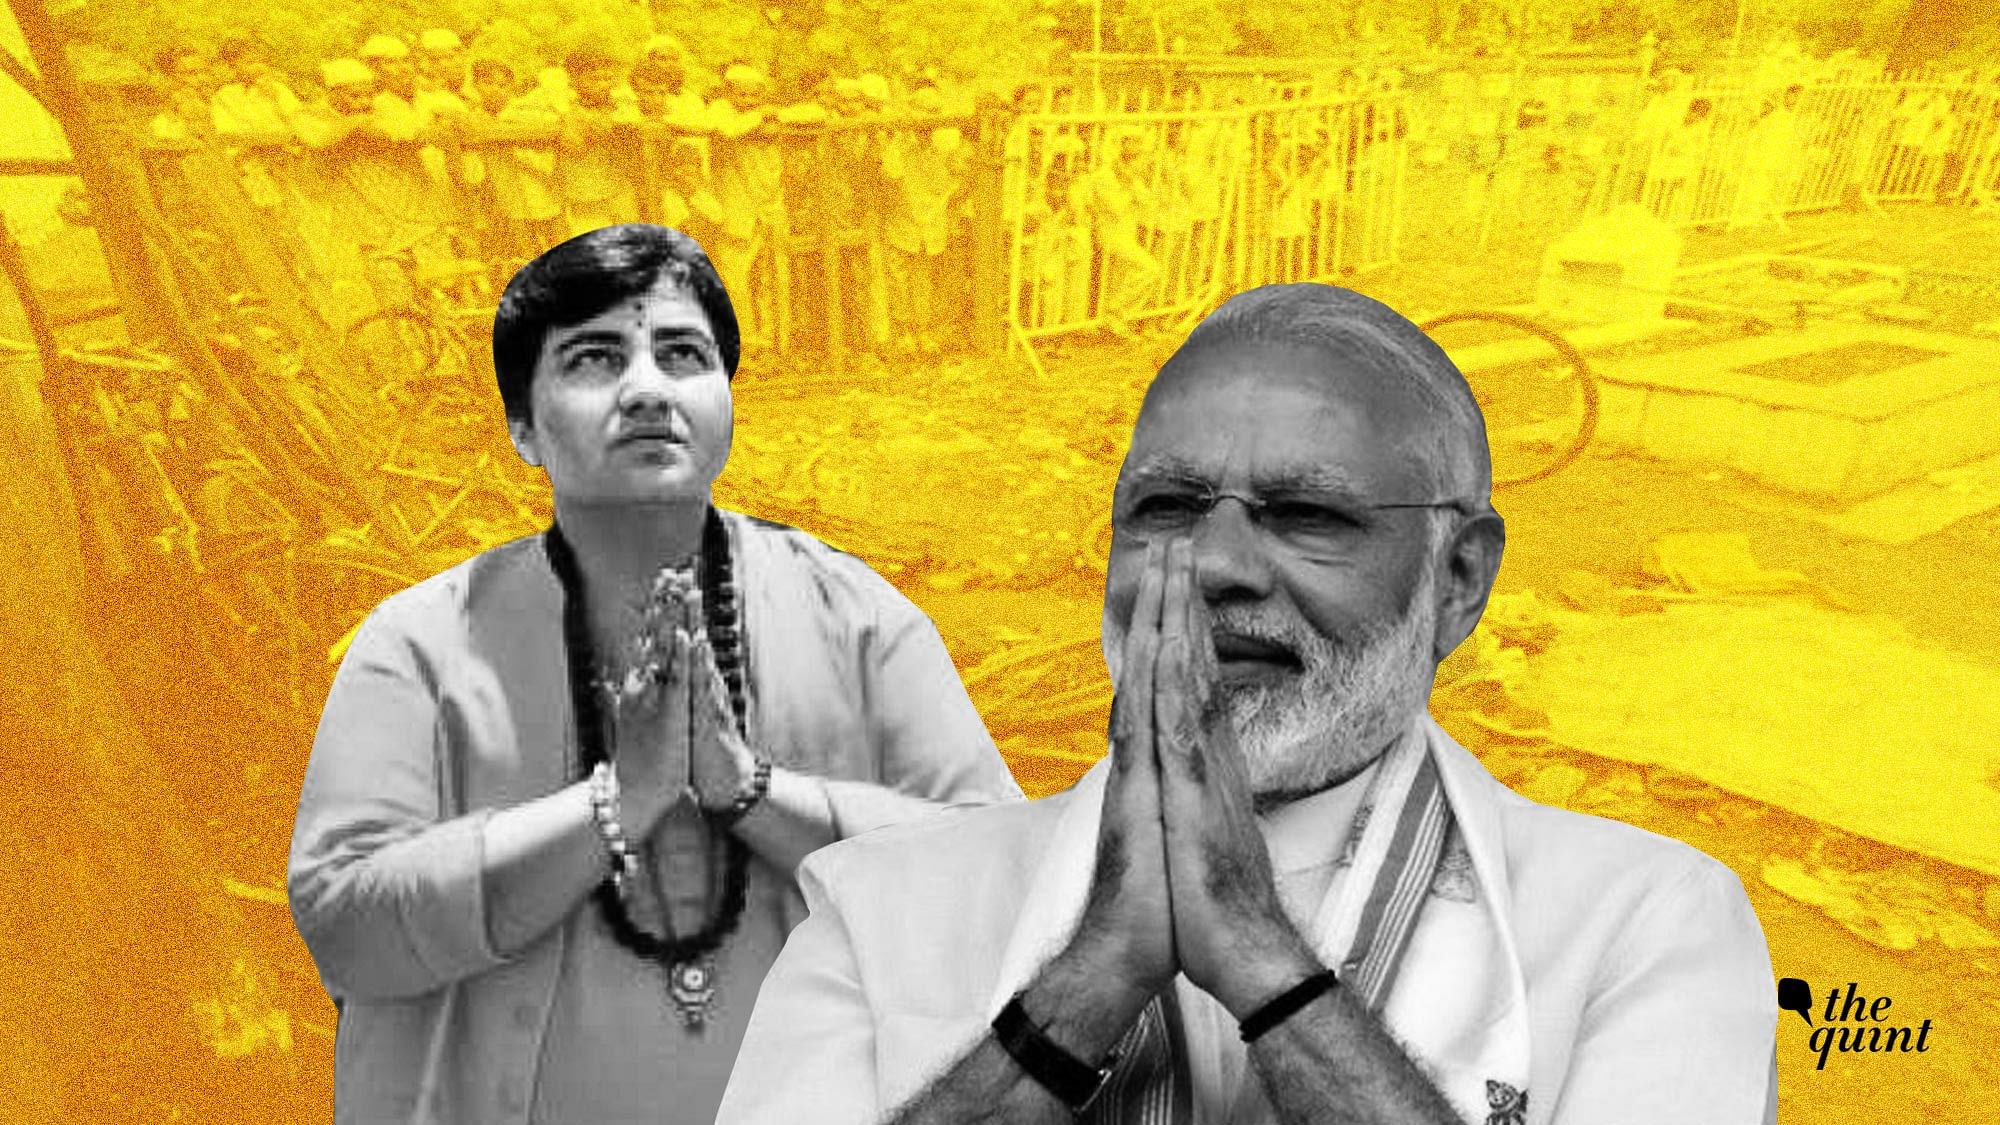 71 former IAS, IFS, IPS officers have condemned the nomination of Sadhvi Pragya Thakur in the Lok Sabha Elections in an open letter to PM Modi.